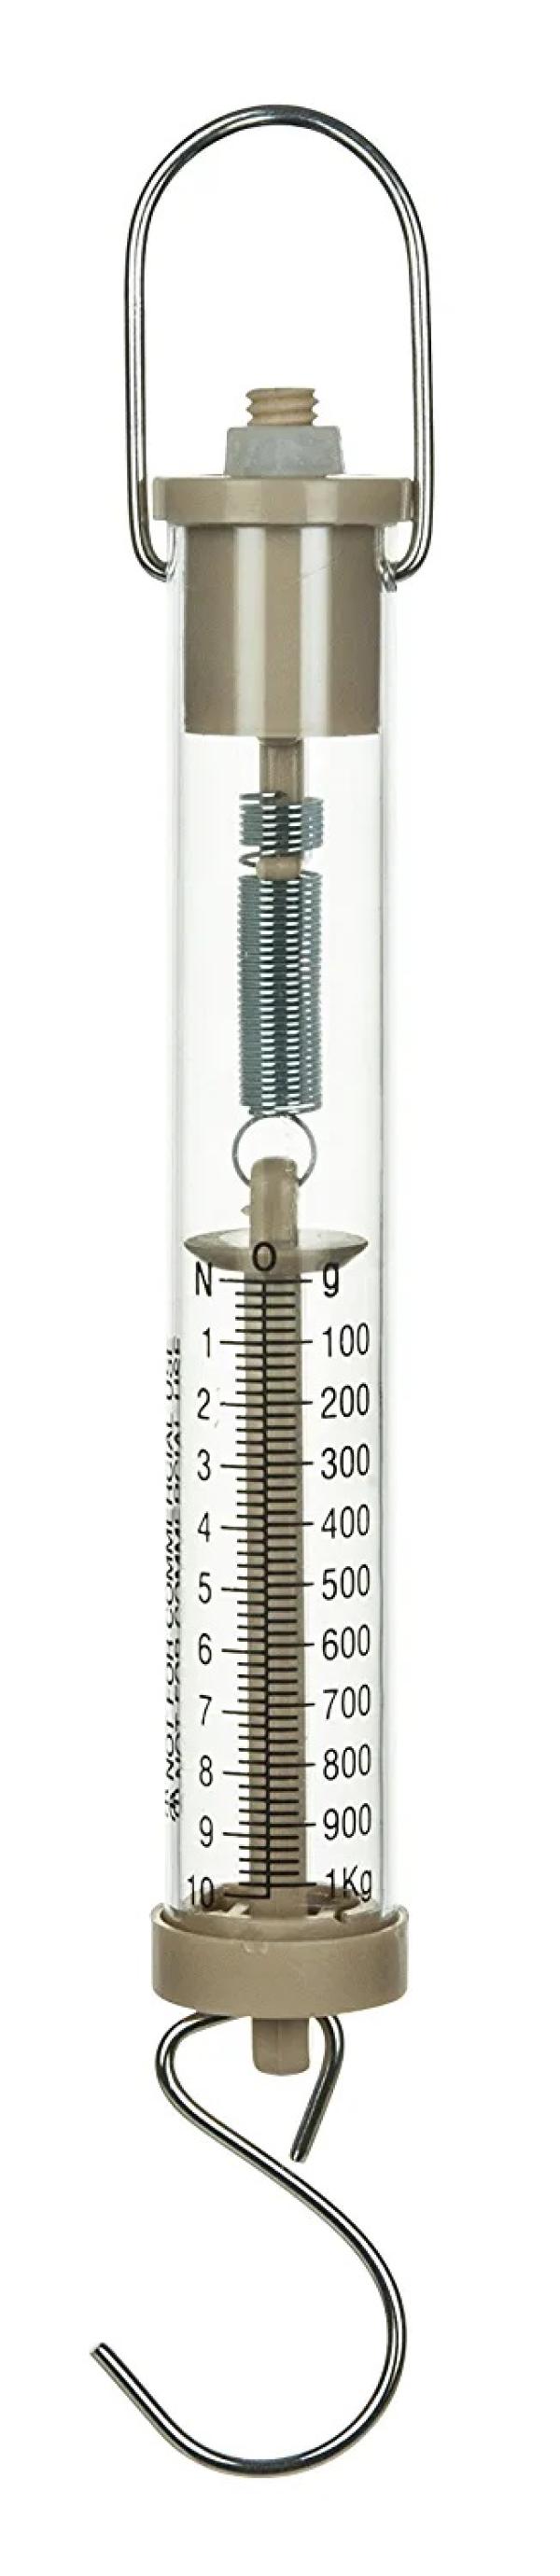 Tubular Spring Scale, 1000g/10N Weight Capacity, Brown